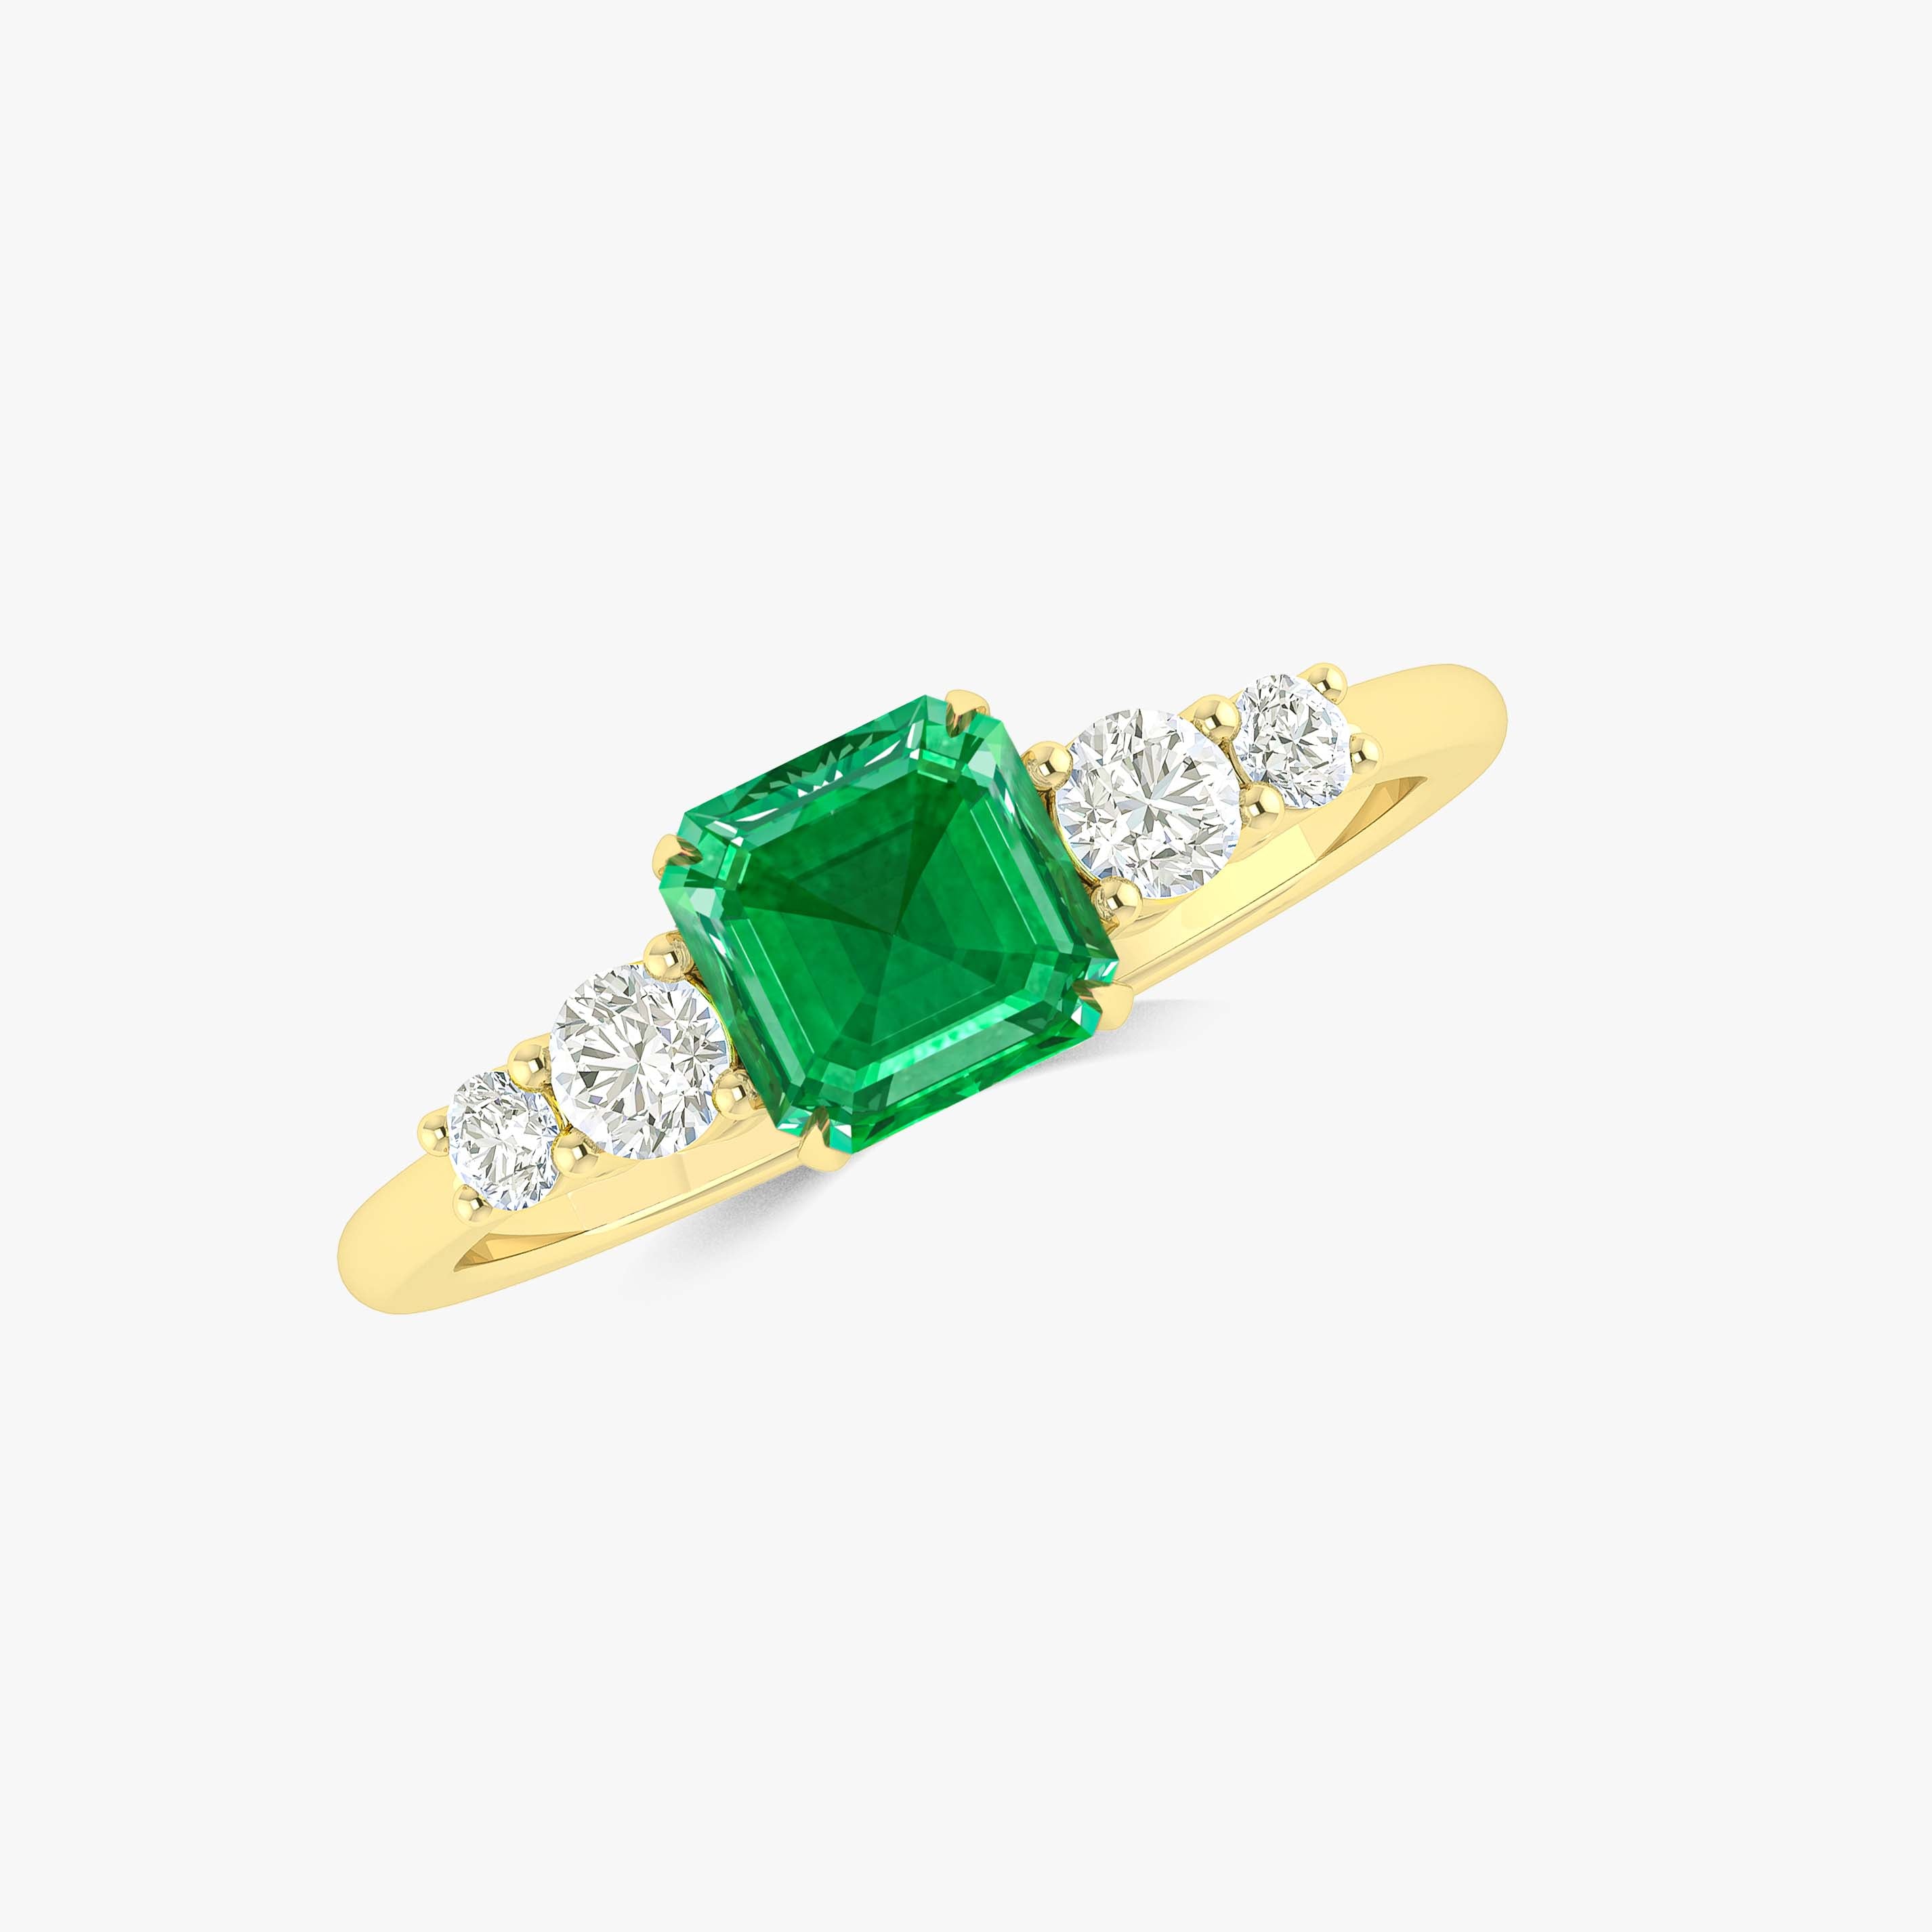 Green Emerald Faceted Octagon Gemstone Ring